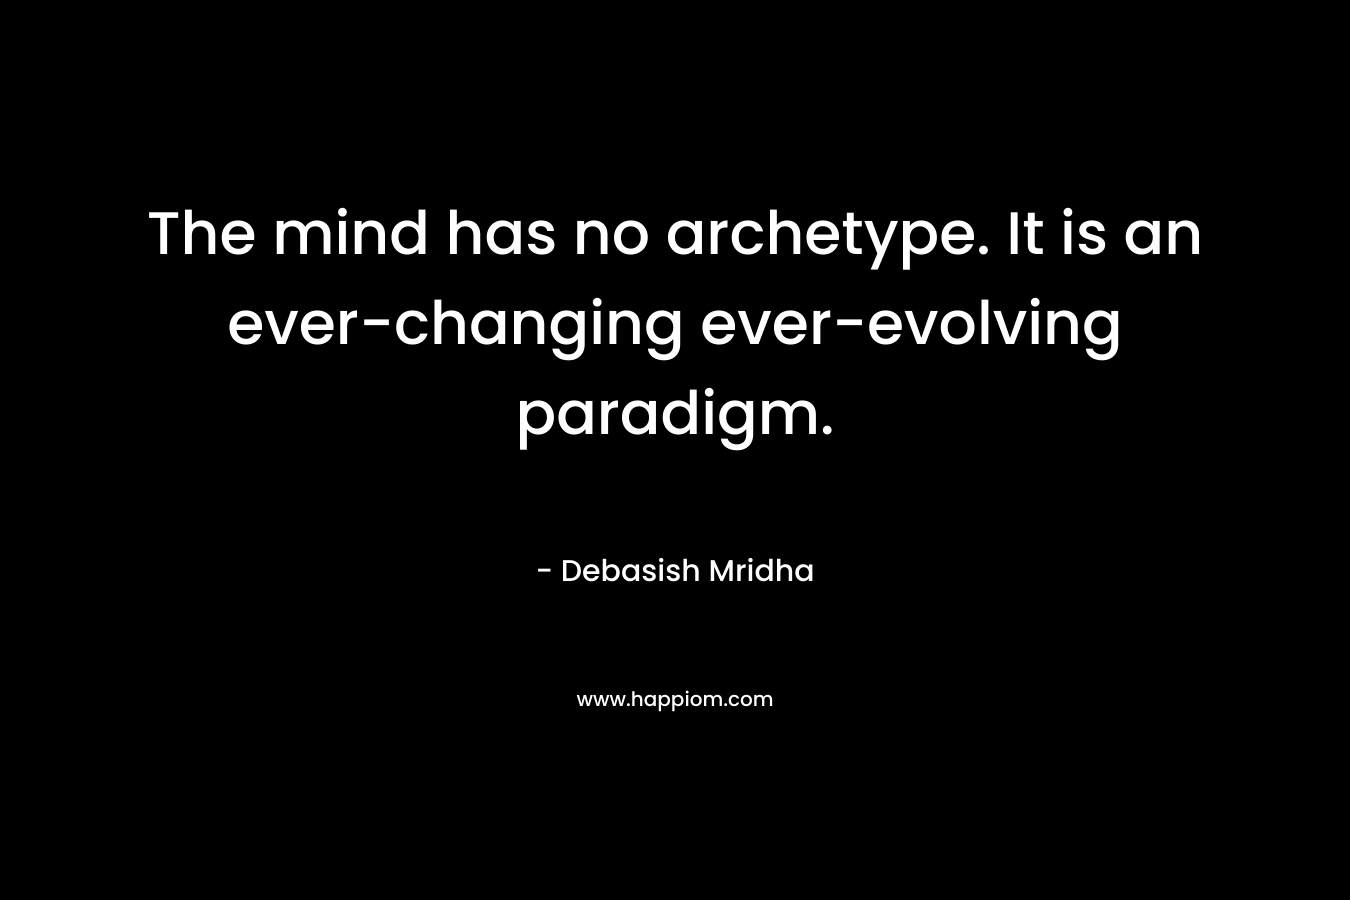 The mind has no archetype. It is an ever-changing ever-evolving paradigm. – Debasish Mridha